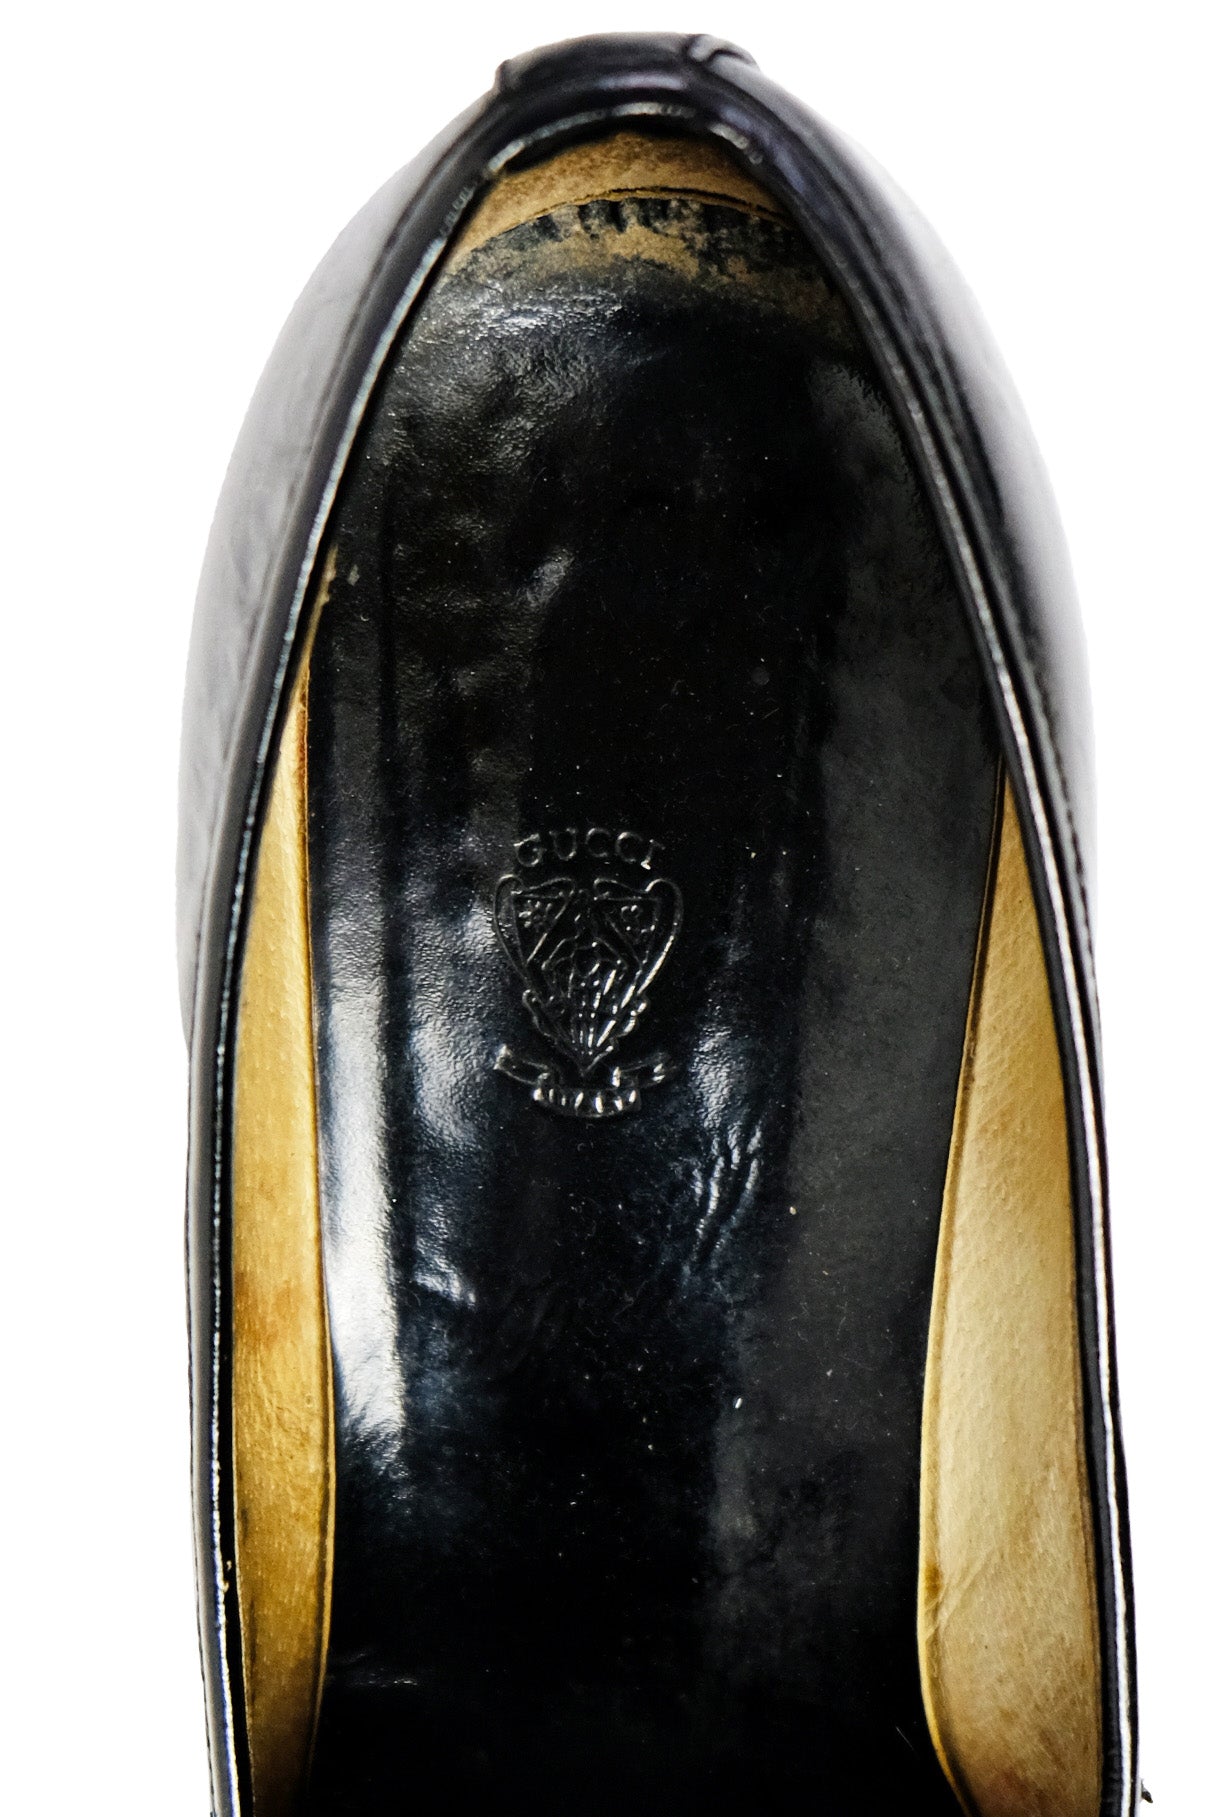 Gucci 1960s Vintage Shoes in Black Patent Leather with Gilt Chain Details, EU39